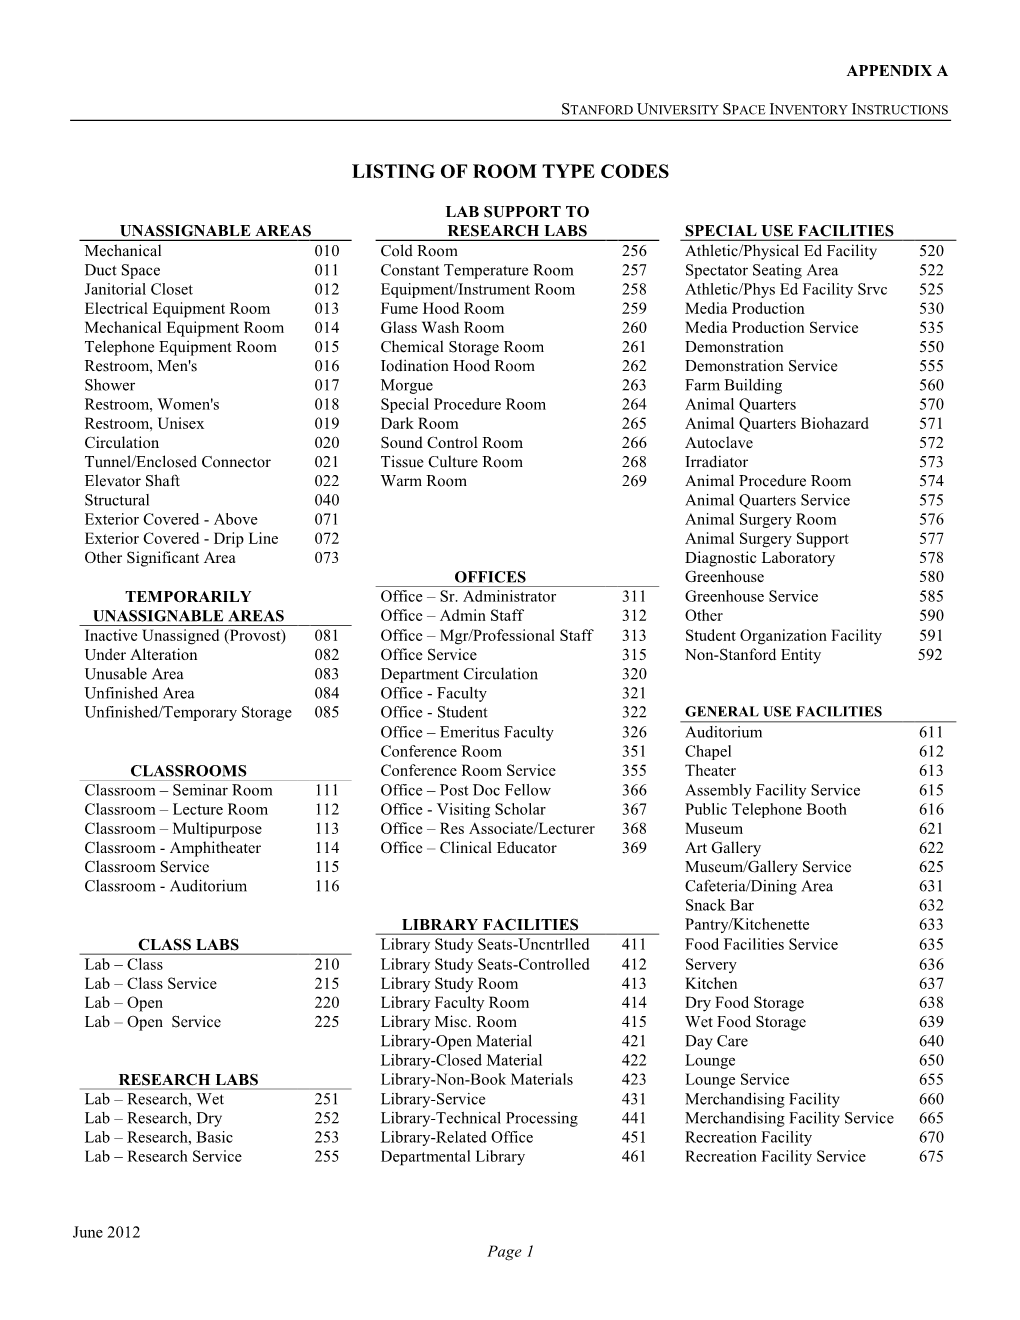 Listing of Room Type Codes